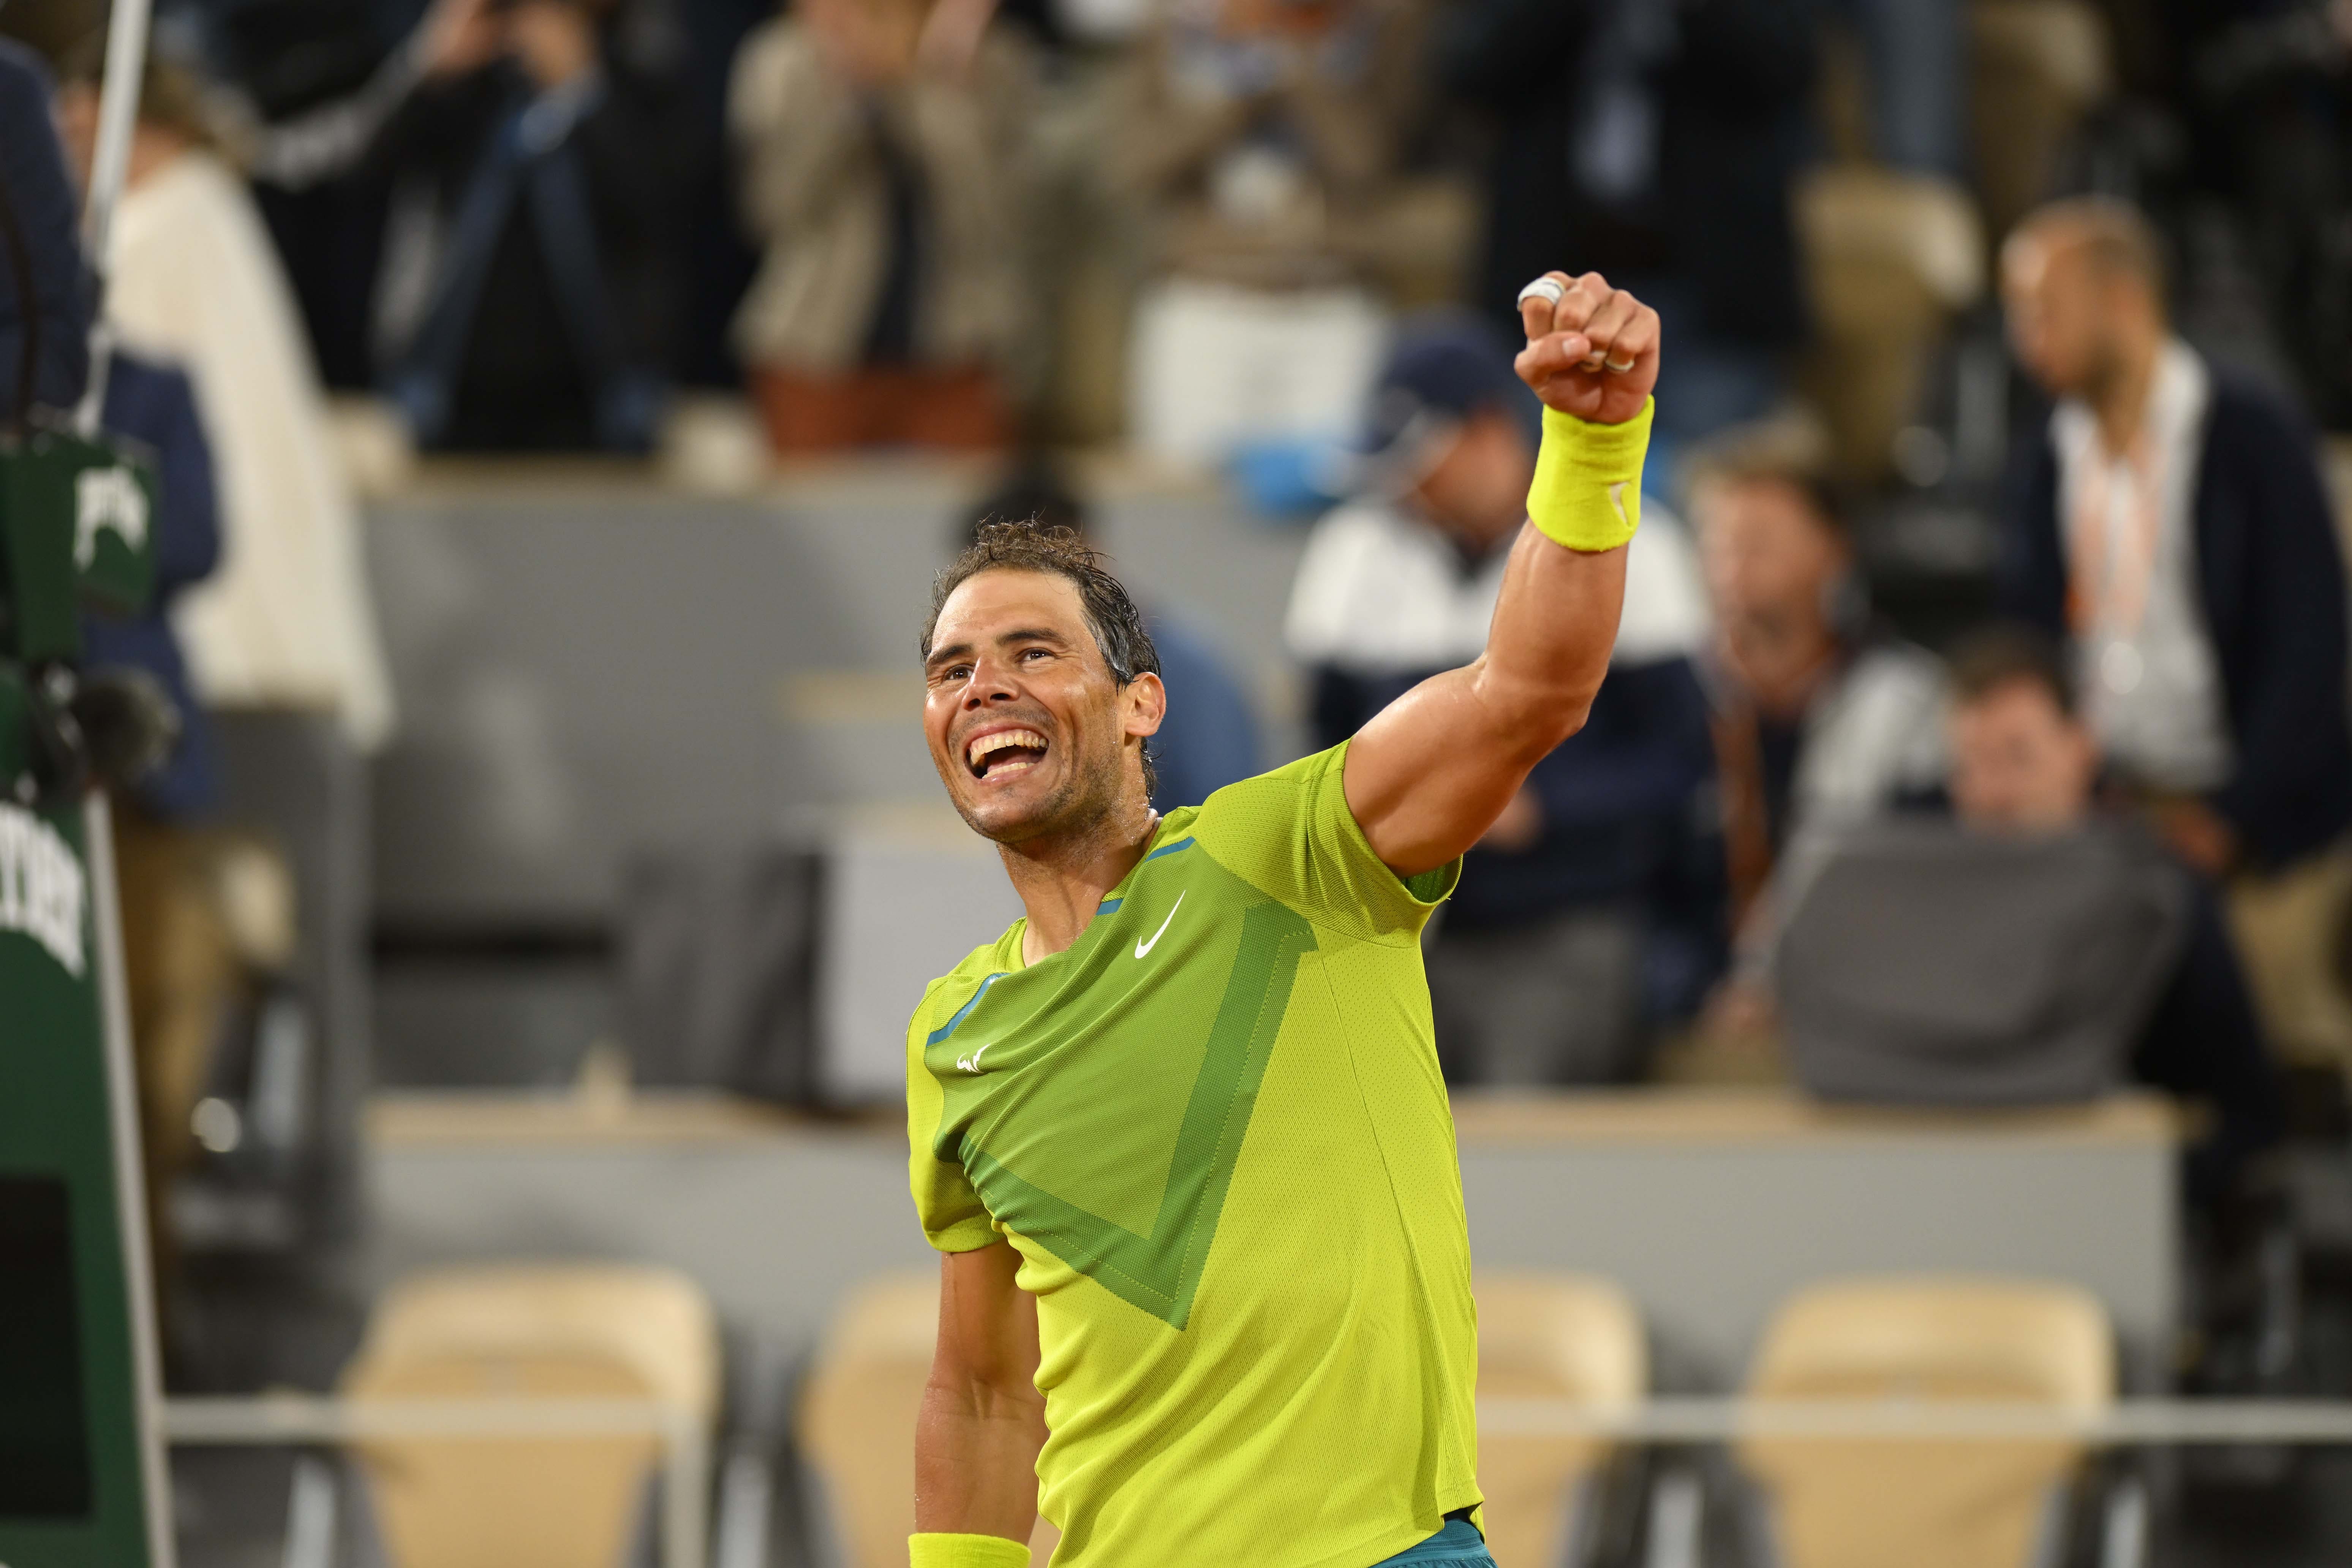 Nadal dashes home hopes for 300th Slam match win   Roland Garros 6192x4128